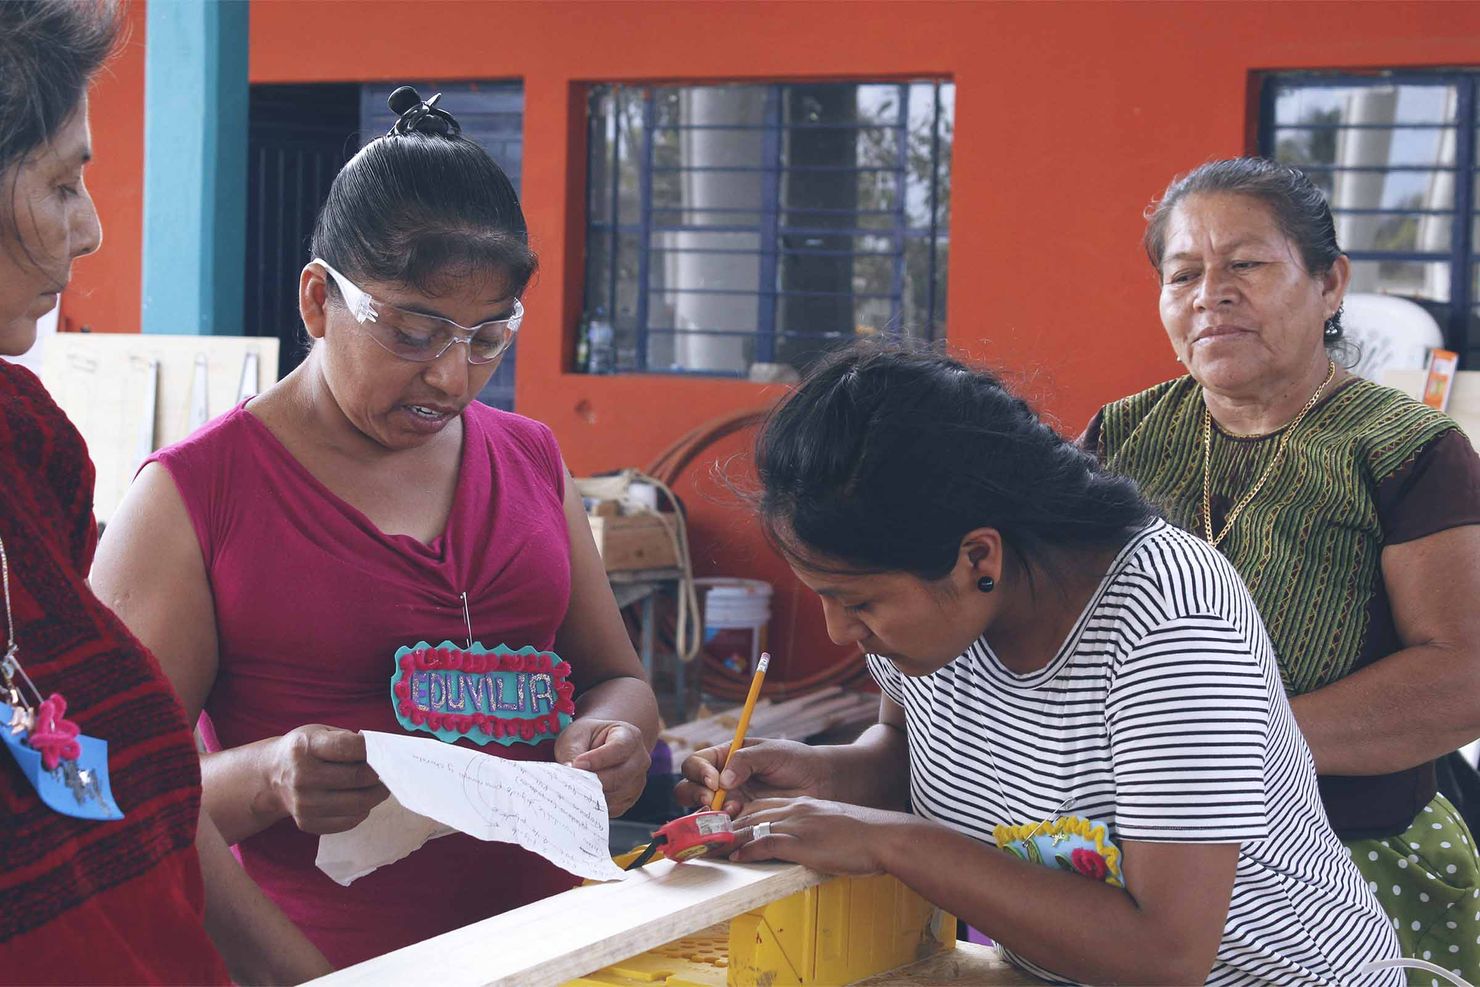 two oaxacan women collaborate to build something (one is marking a measurement on a piece of wood) while a third woman watches